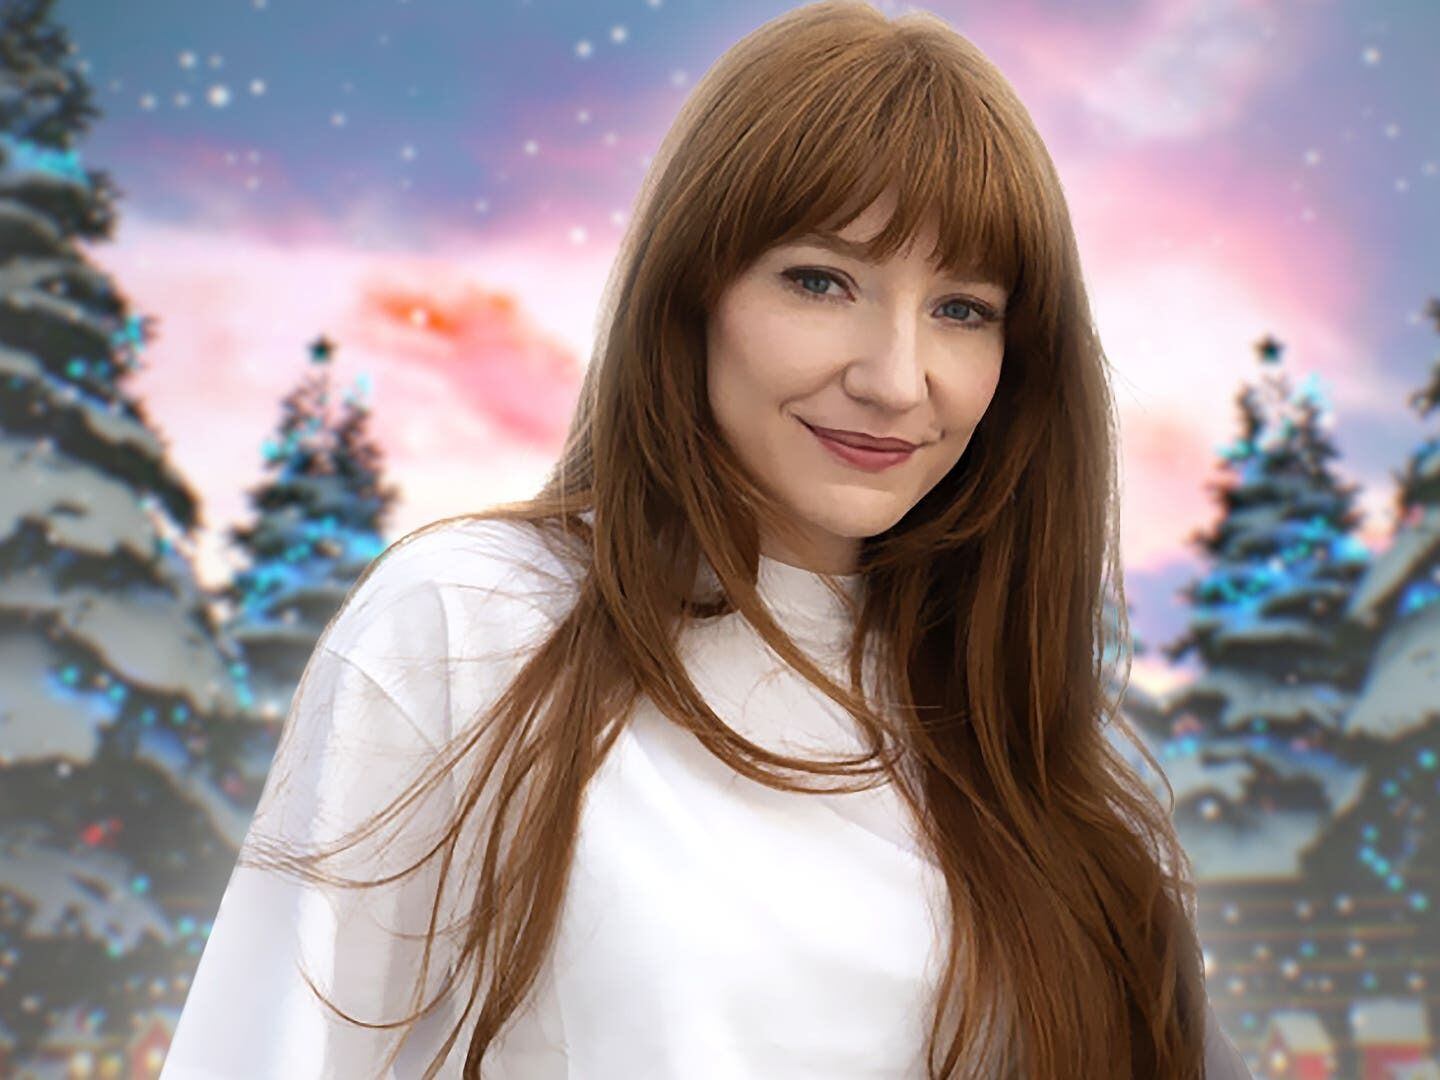 Girls Aloud star Nicola Roberts joins Strictly Christmas special line-up